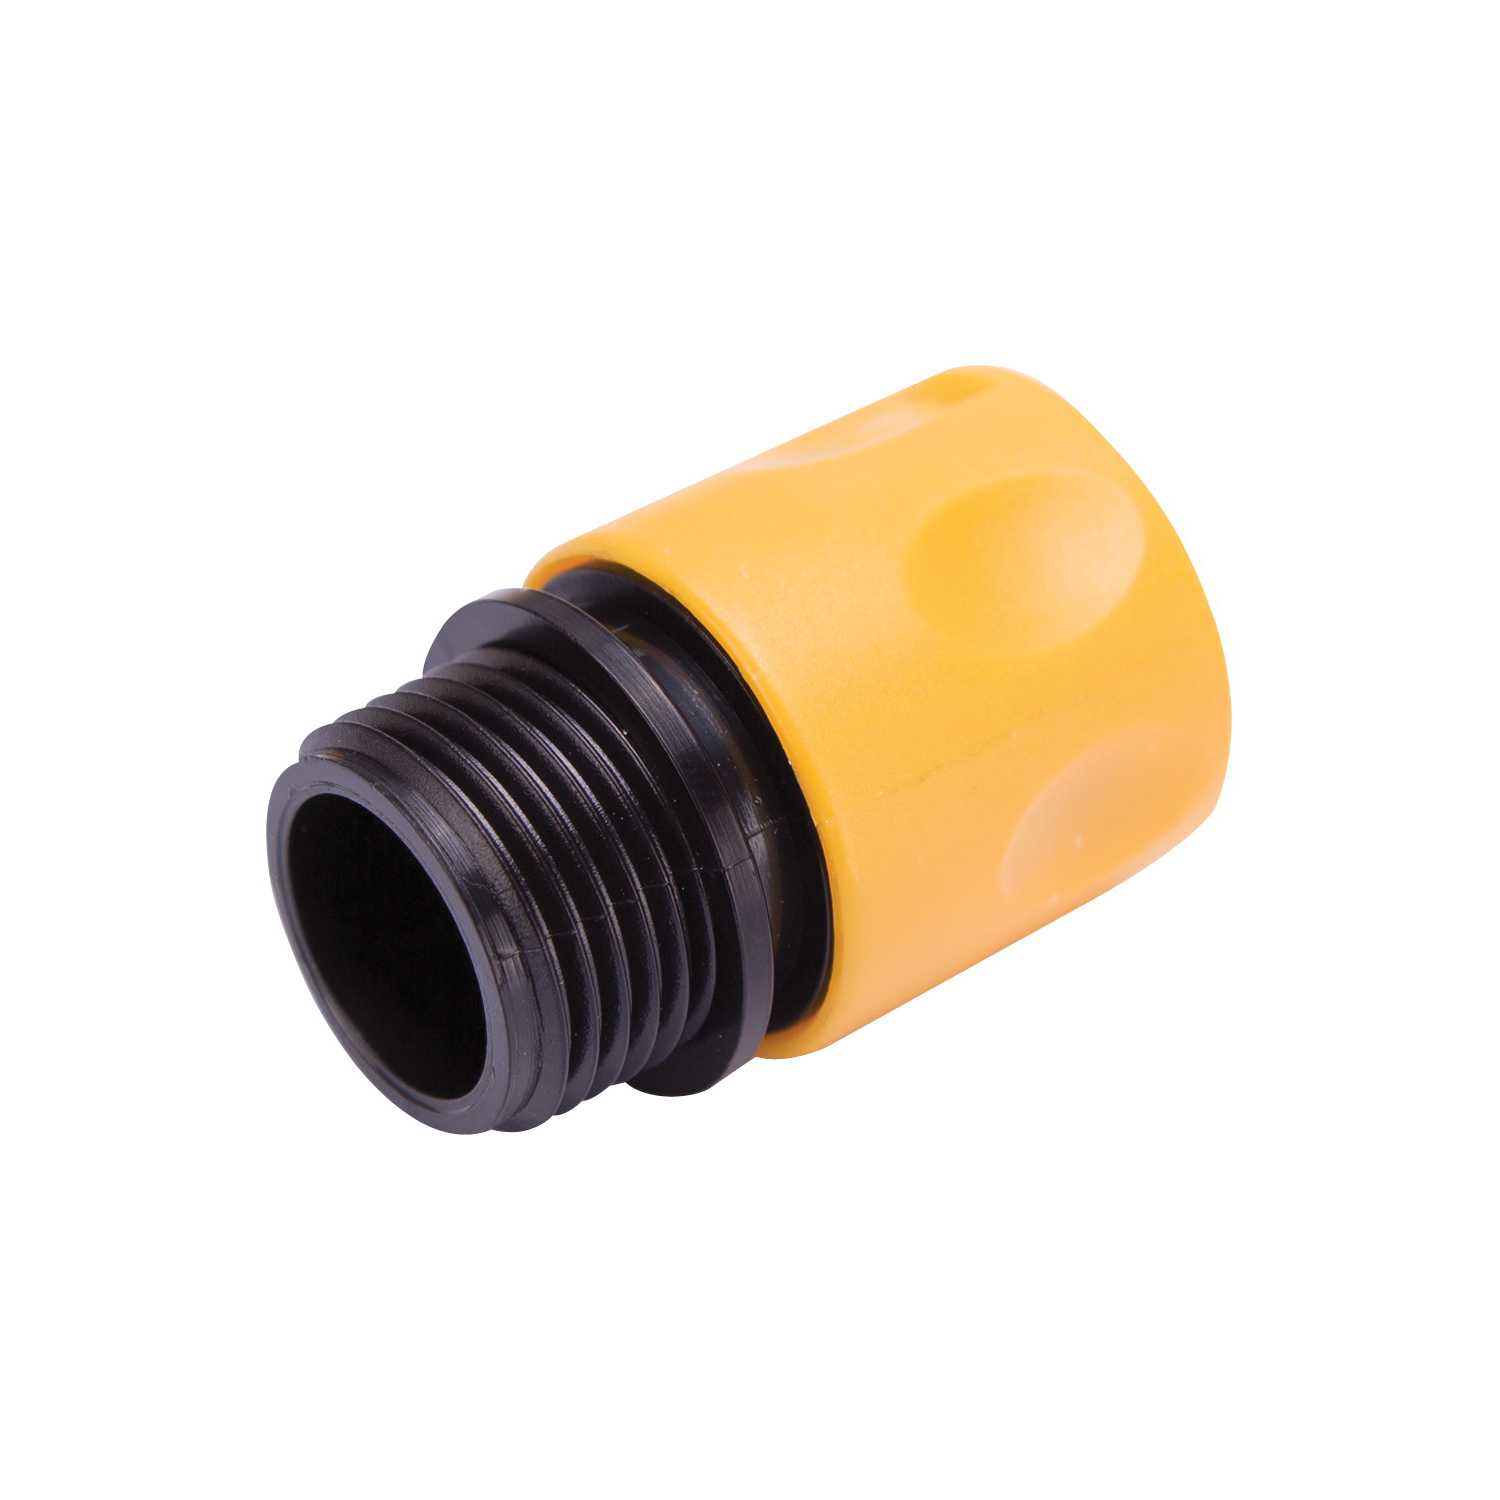 Landscapers Select GC522 Hose Connector, 3/4 in, Male, Plastic, Yellow and Black